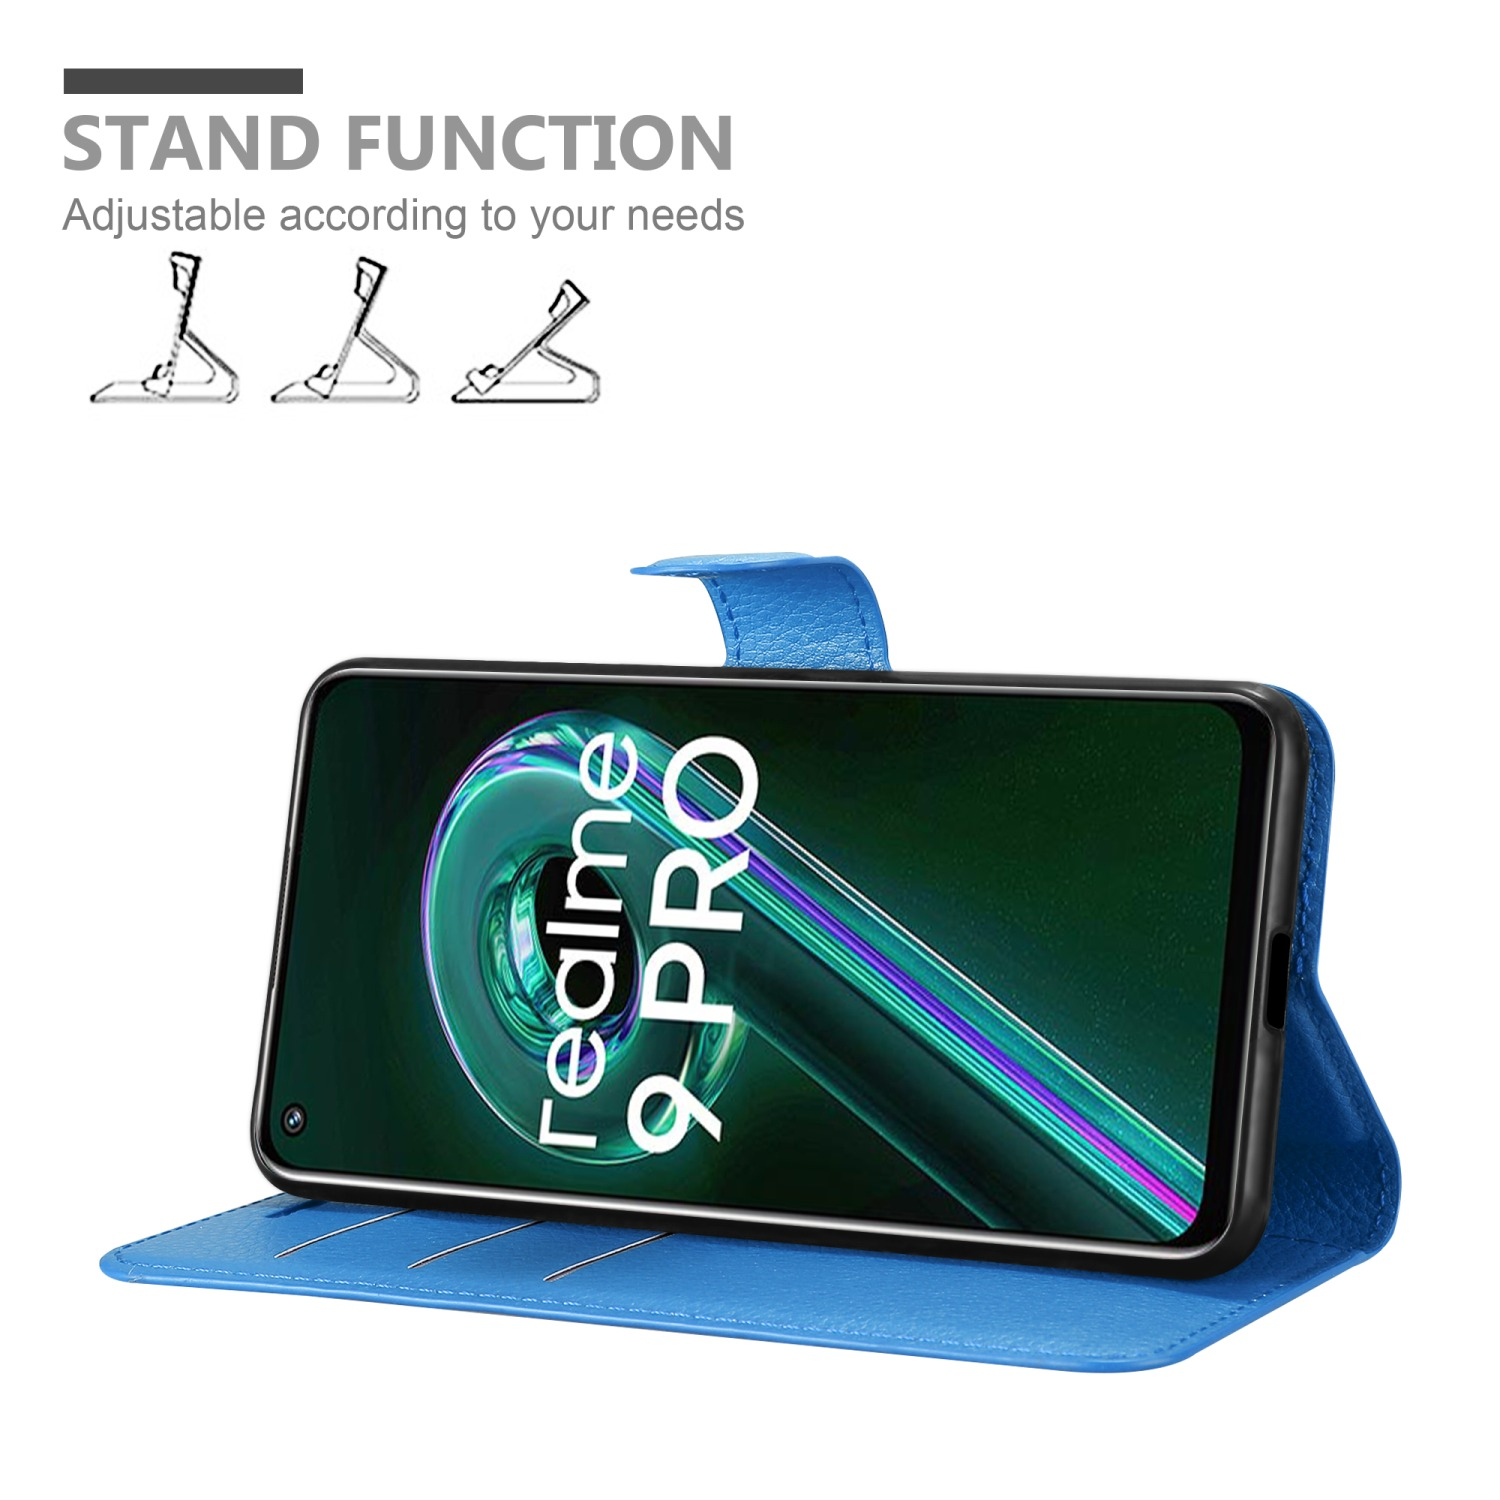 CADORABO Book Hülle Standfunktion, / 5G 9 5G, V25 9 Realme, 2 / / PRO Q5 PASTELL Bookcover, LITE OnePlus BLAU CE / Nord